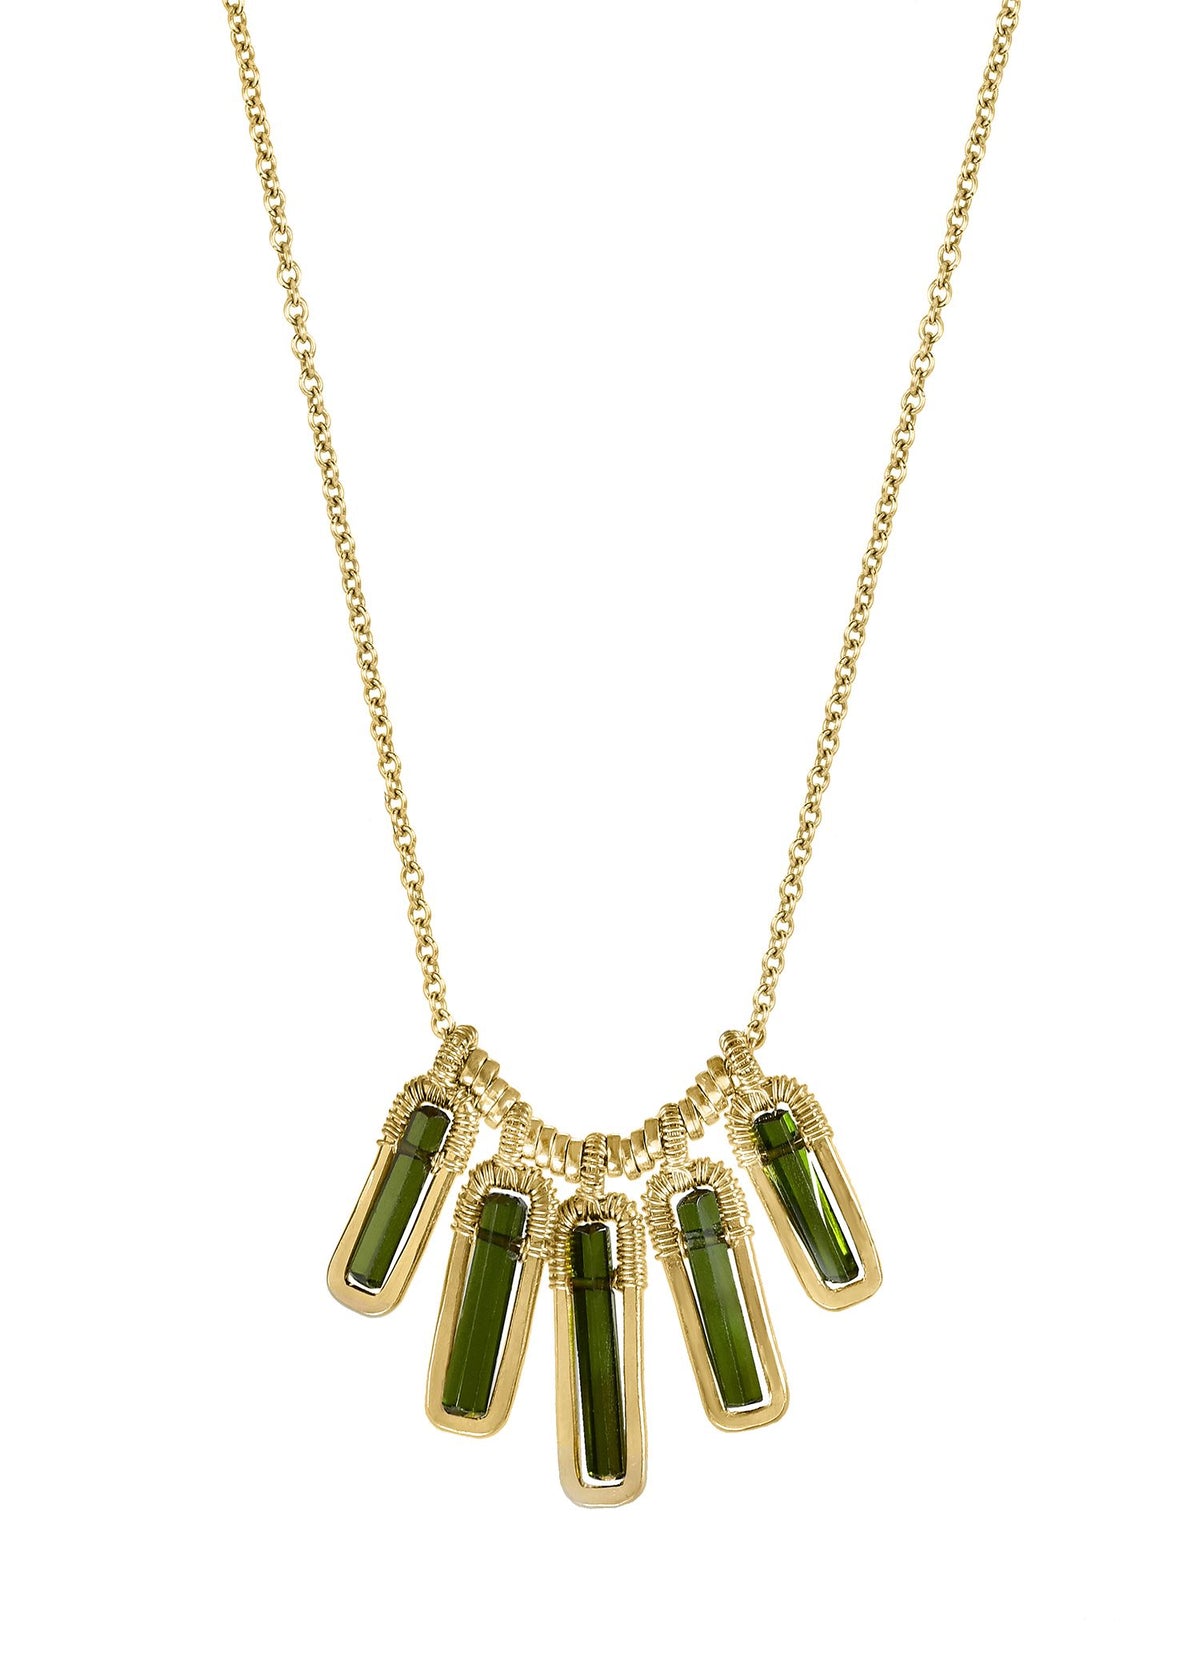 Tourmaline 14k gold fill Necklace measures 16” in length Pendants measure 7/16”-5/8” in length and 3/16” in width Handmade in our Los Angeles studio